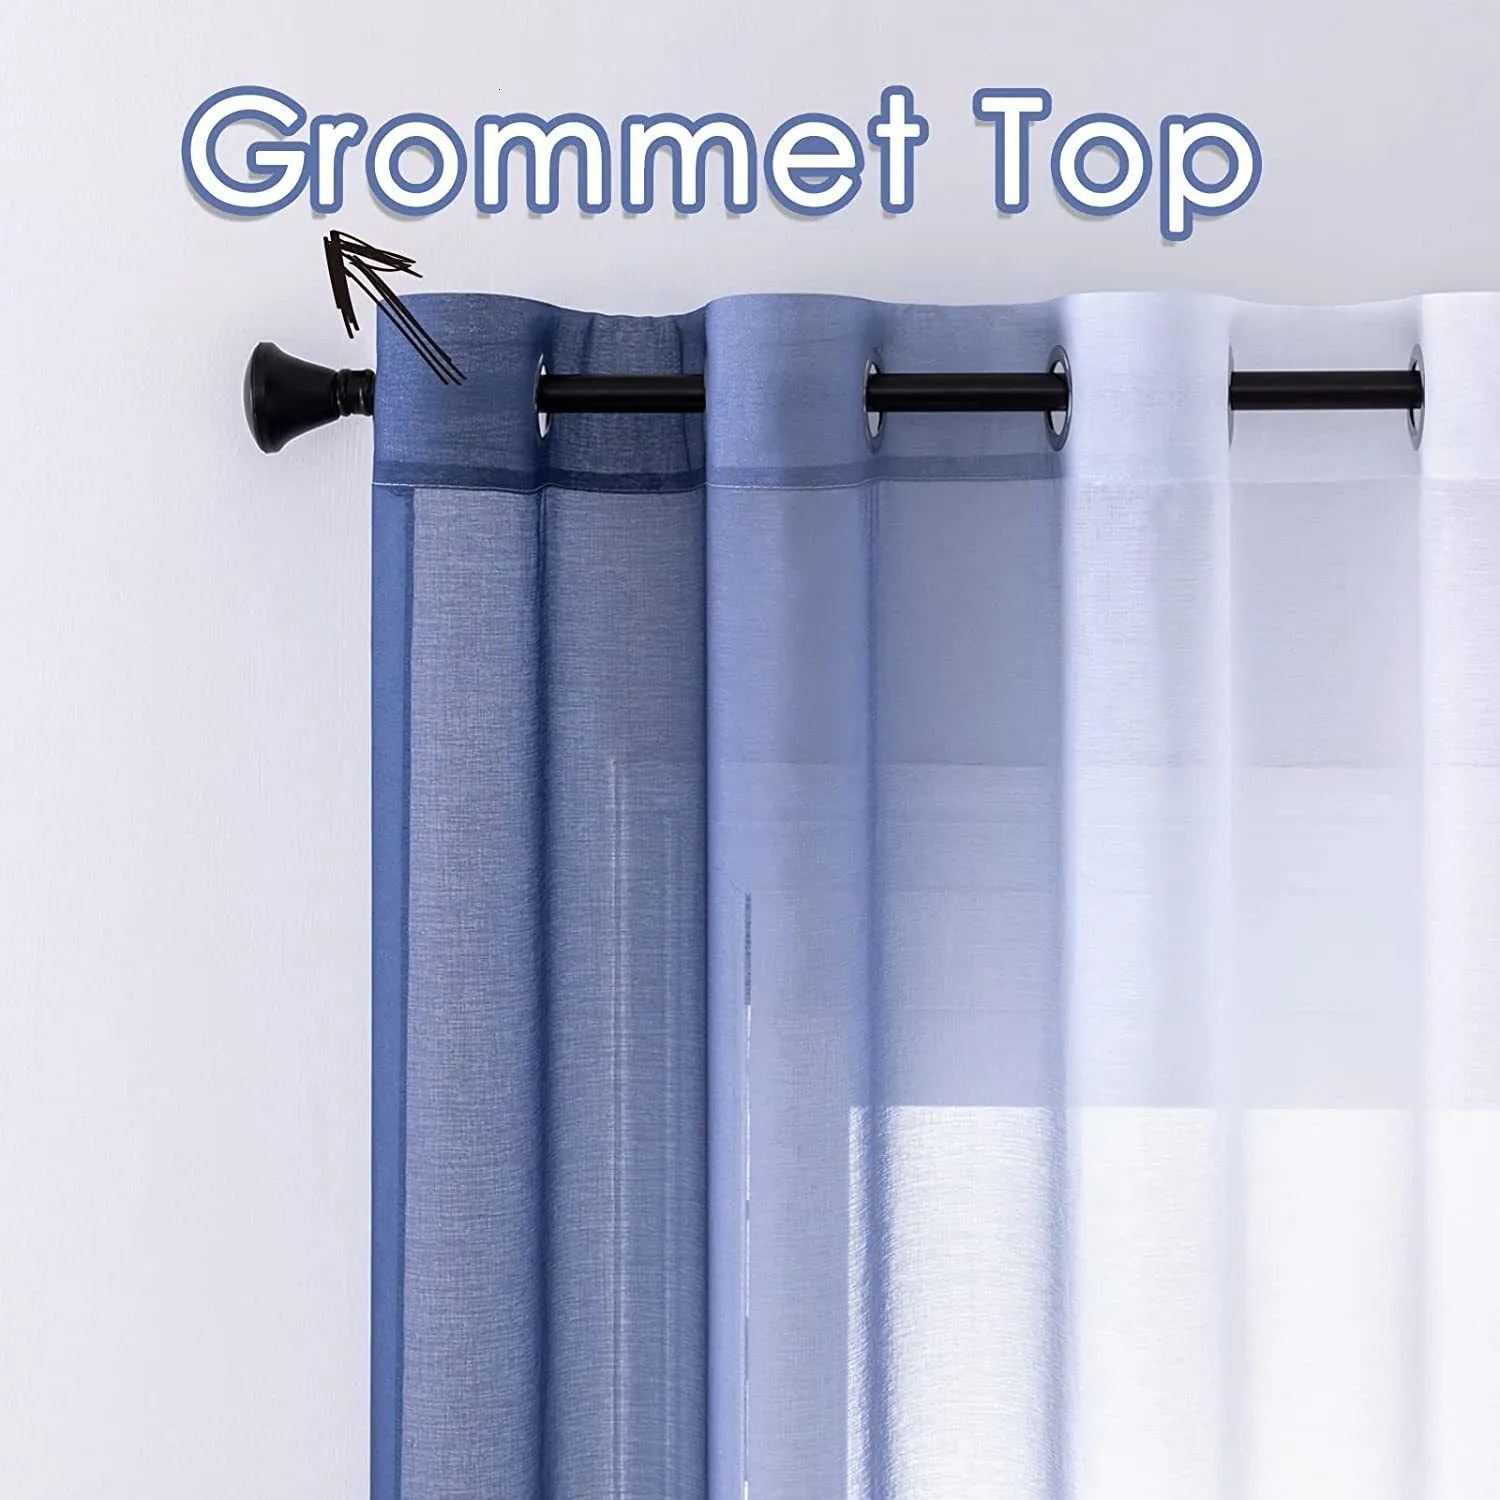 Sheer Curtains LISM Gradient Left and Right Tulle Curtains for Living Room Bedroom Organza Voile Curtain Window Treatment Panels Drapes Custom